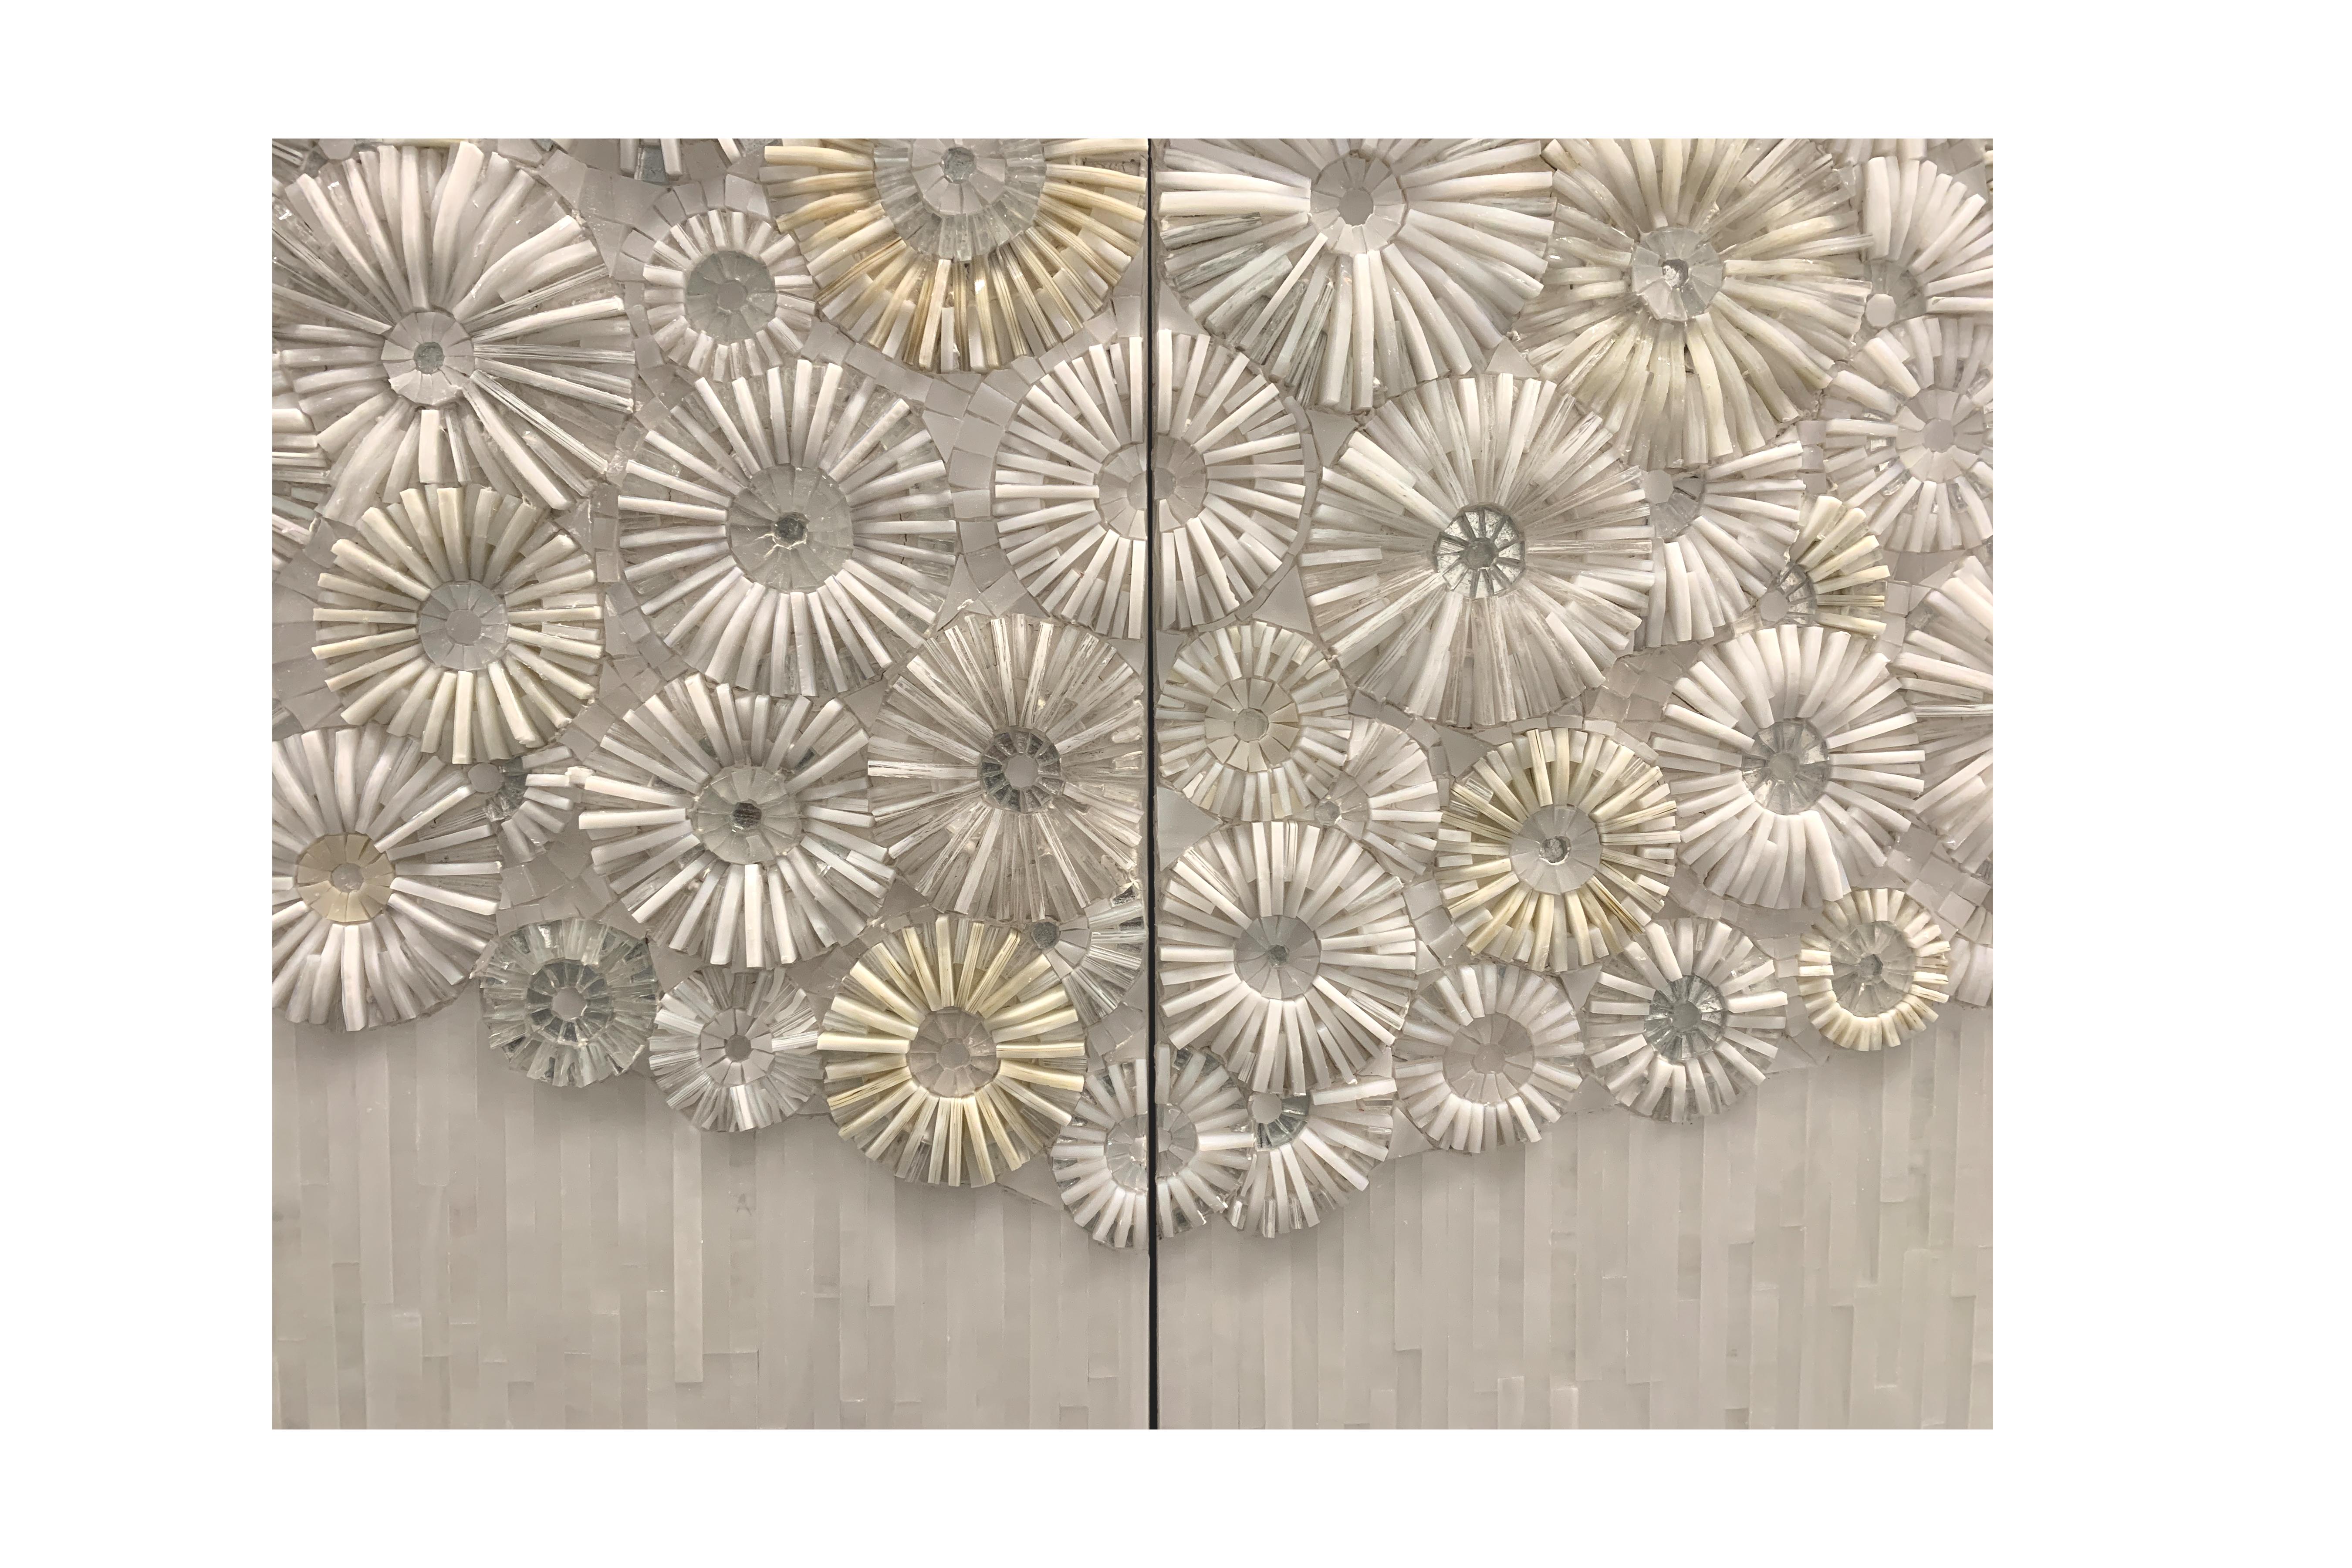 The blossom buffet by Ercole Home has a 4-door front.
Each door is covered in handcut glass mosaic. Decorating the surface in a variety shades of white and ivory the blossom buffet has a floral mosaic pattern. Thin vertical glass strips cover the